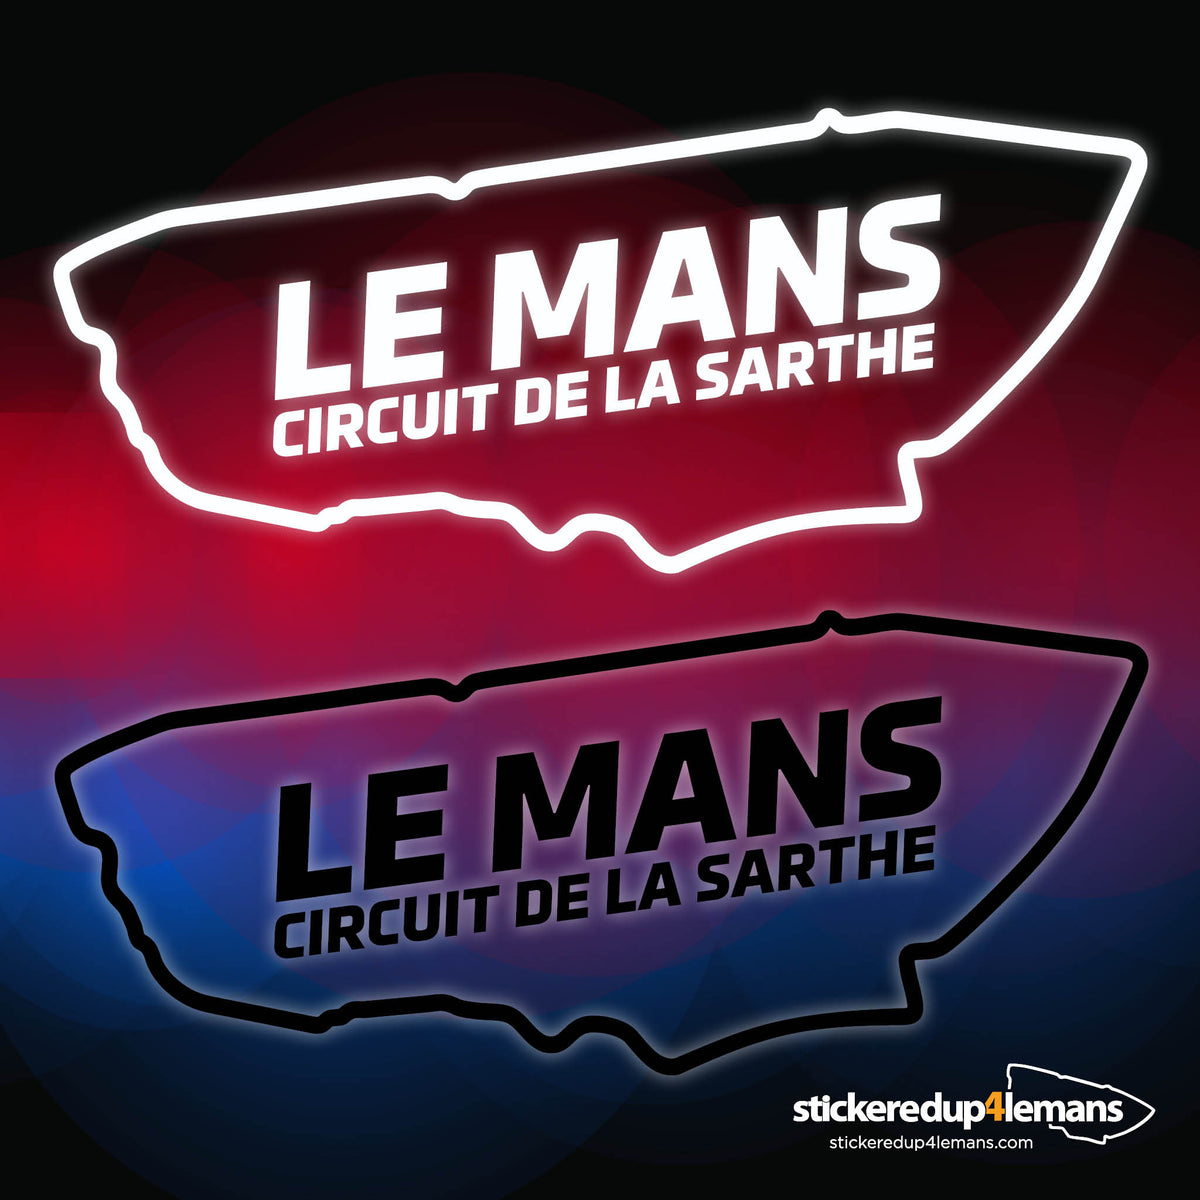 Small Le Mans Circuit with text sticker